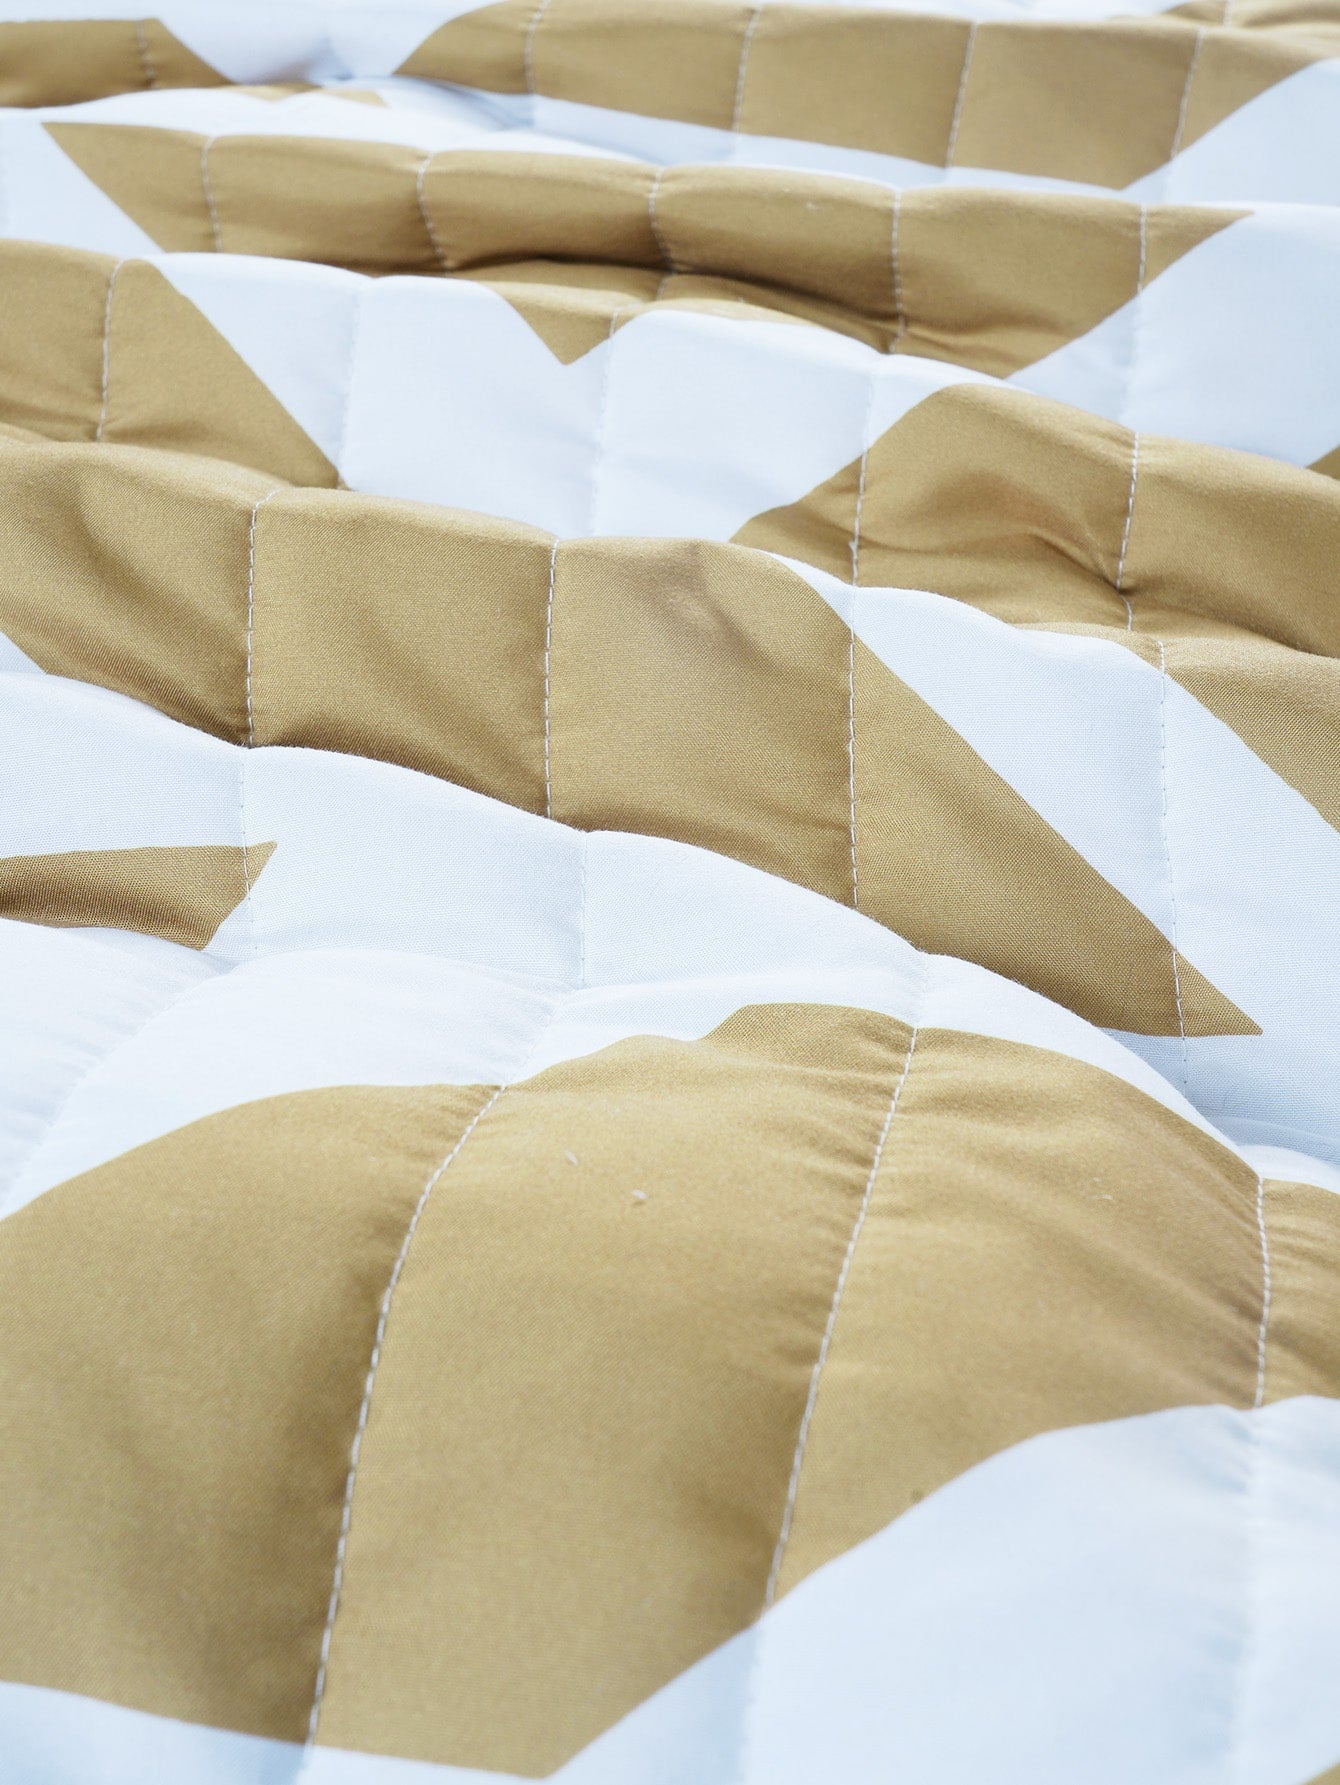 Geometric Pattern Quilted Bedspread Set